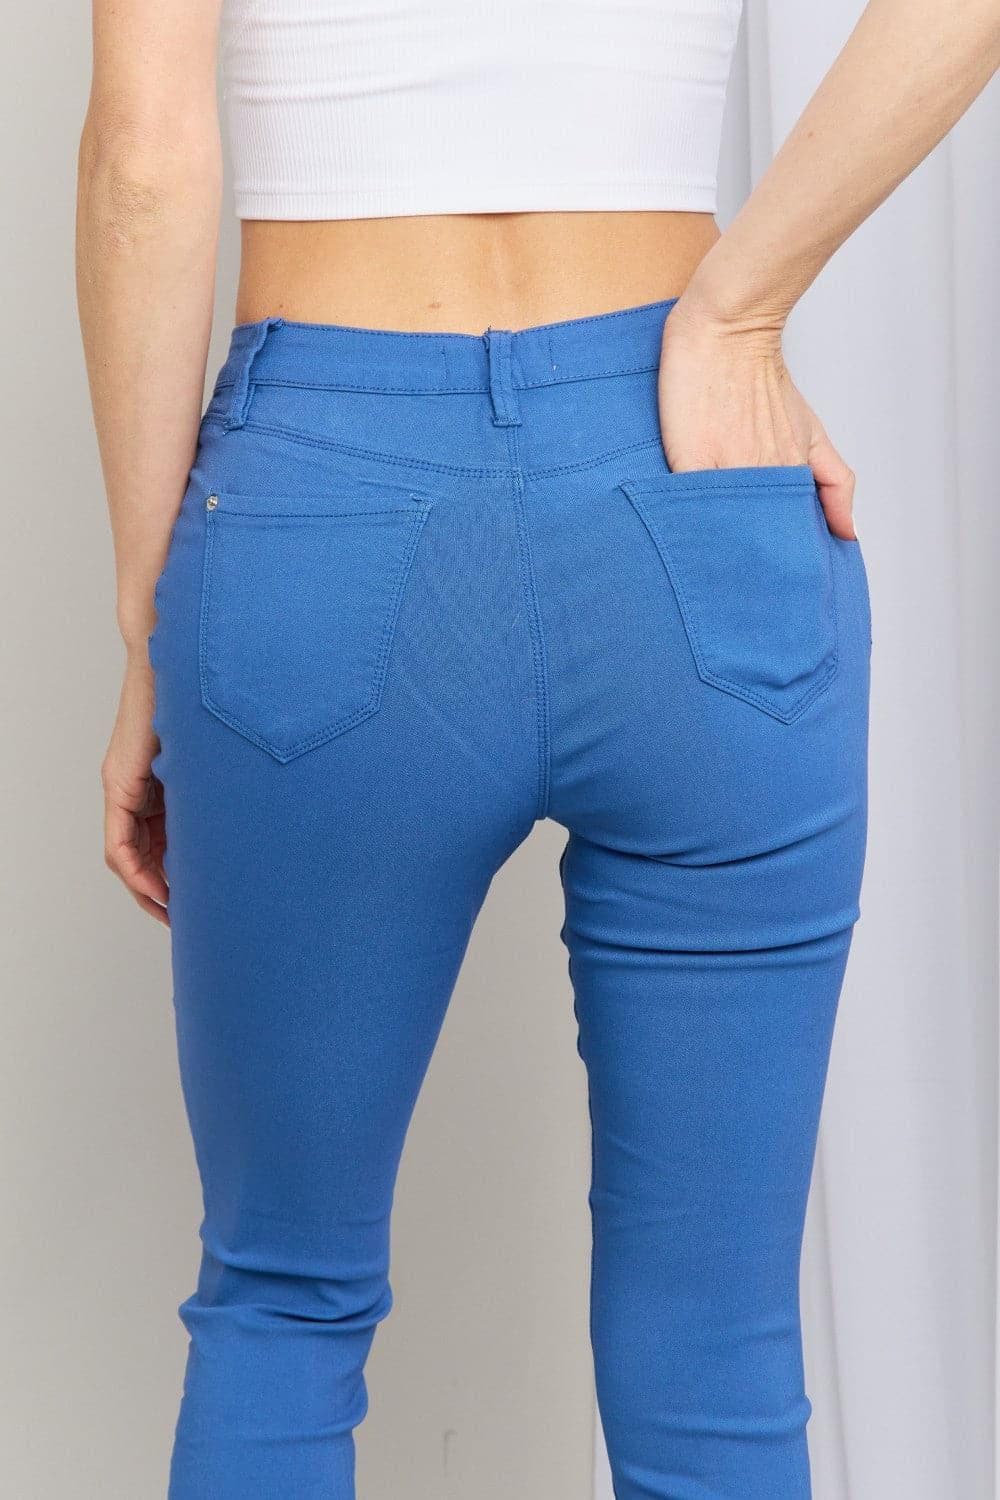 YMI Jeanswear Kate Hyper-Stretch Full Size Mid-Rise Skinny Jeans in Electric Blue - SwagglyLife Home & Fashion